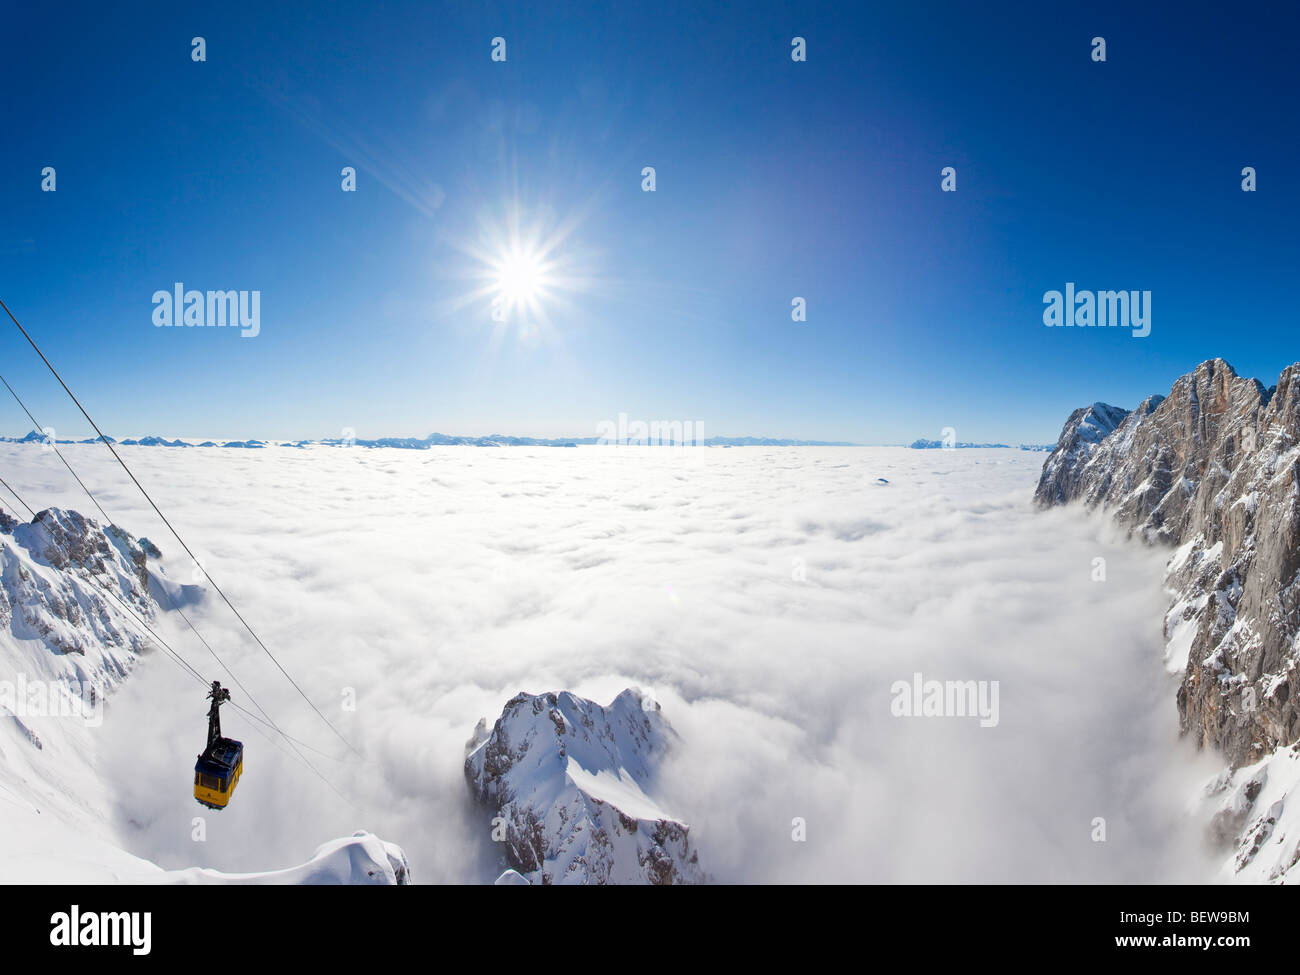 Ropeway and gondola above clouds at the Dachsteingebirge, Ramsau am Dachstein, Styria, Austria, high angle view Stock Photo